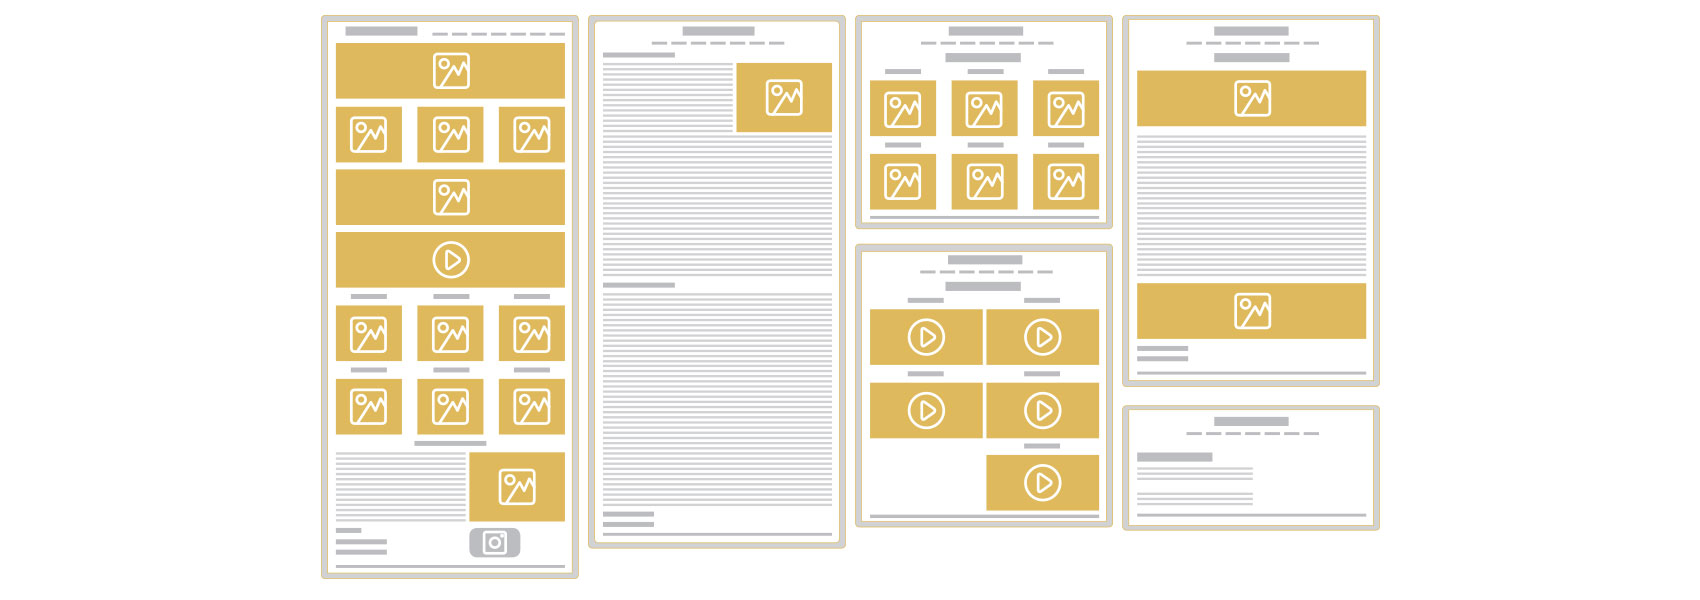 Wireframes detailing existing site structure